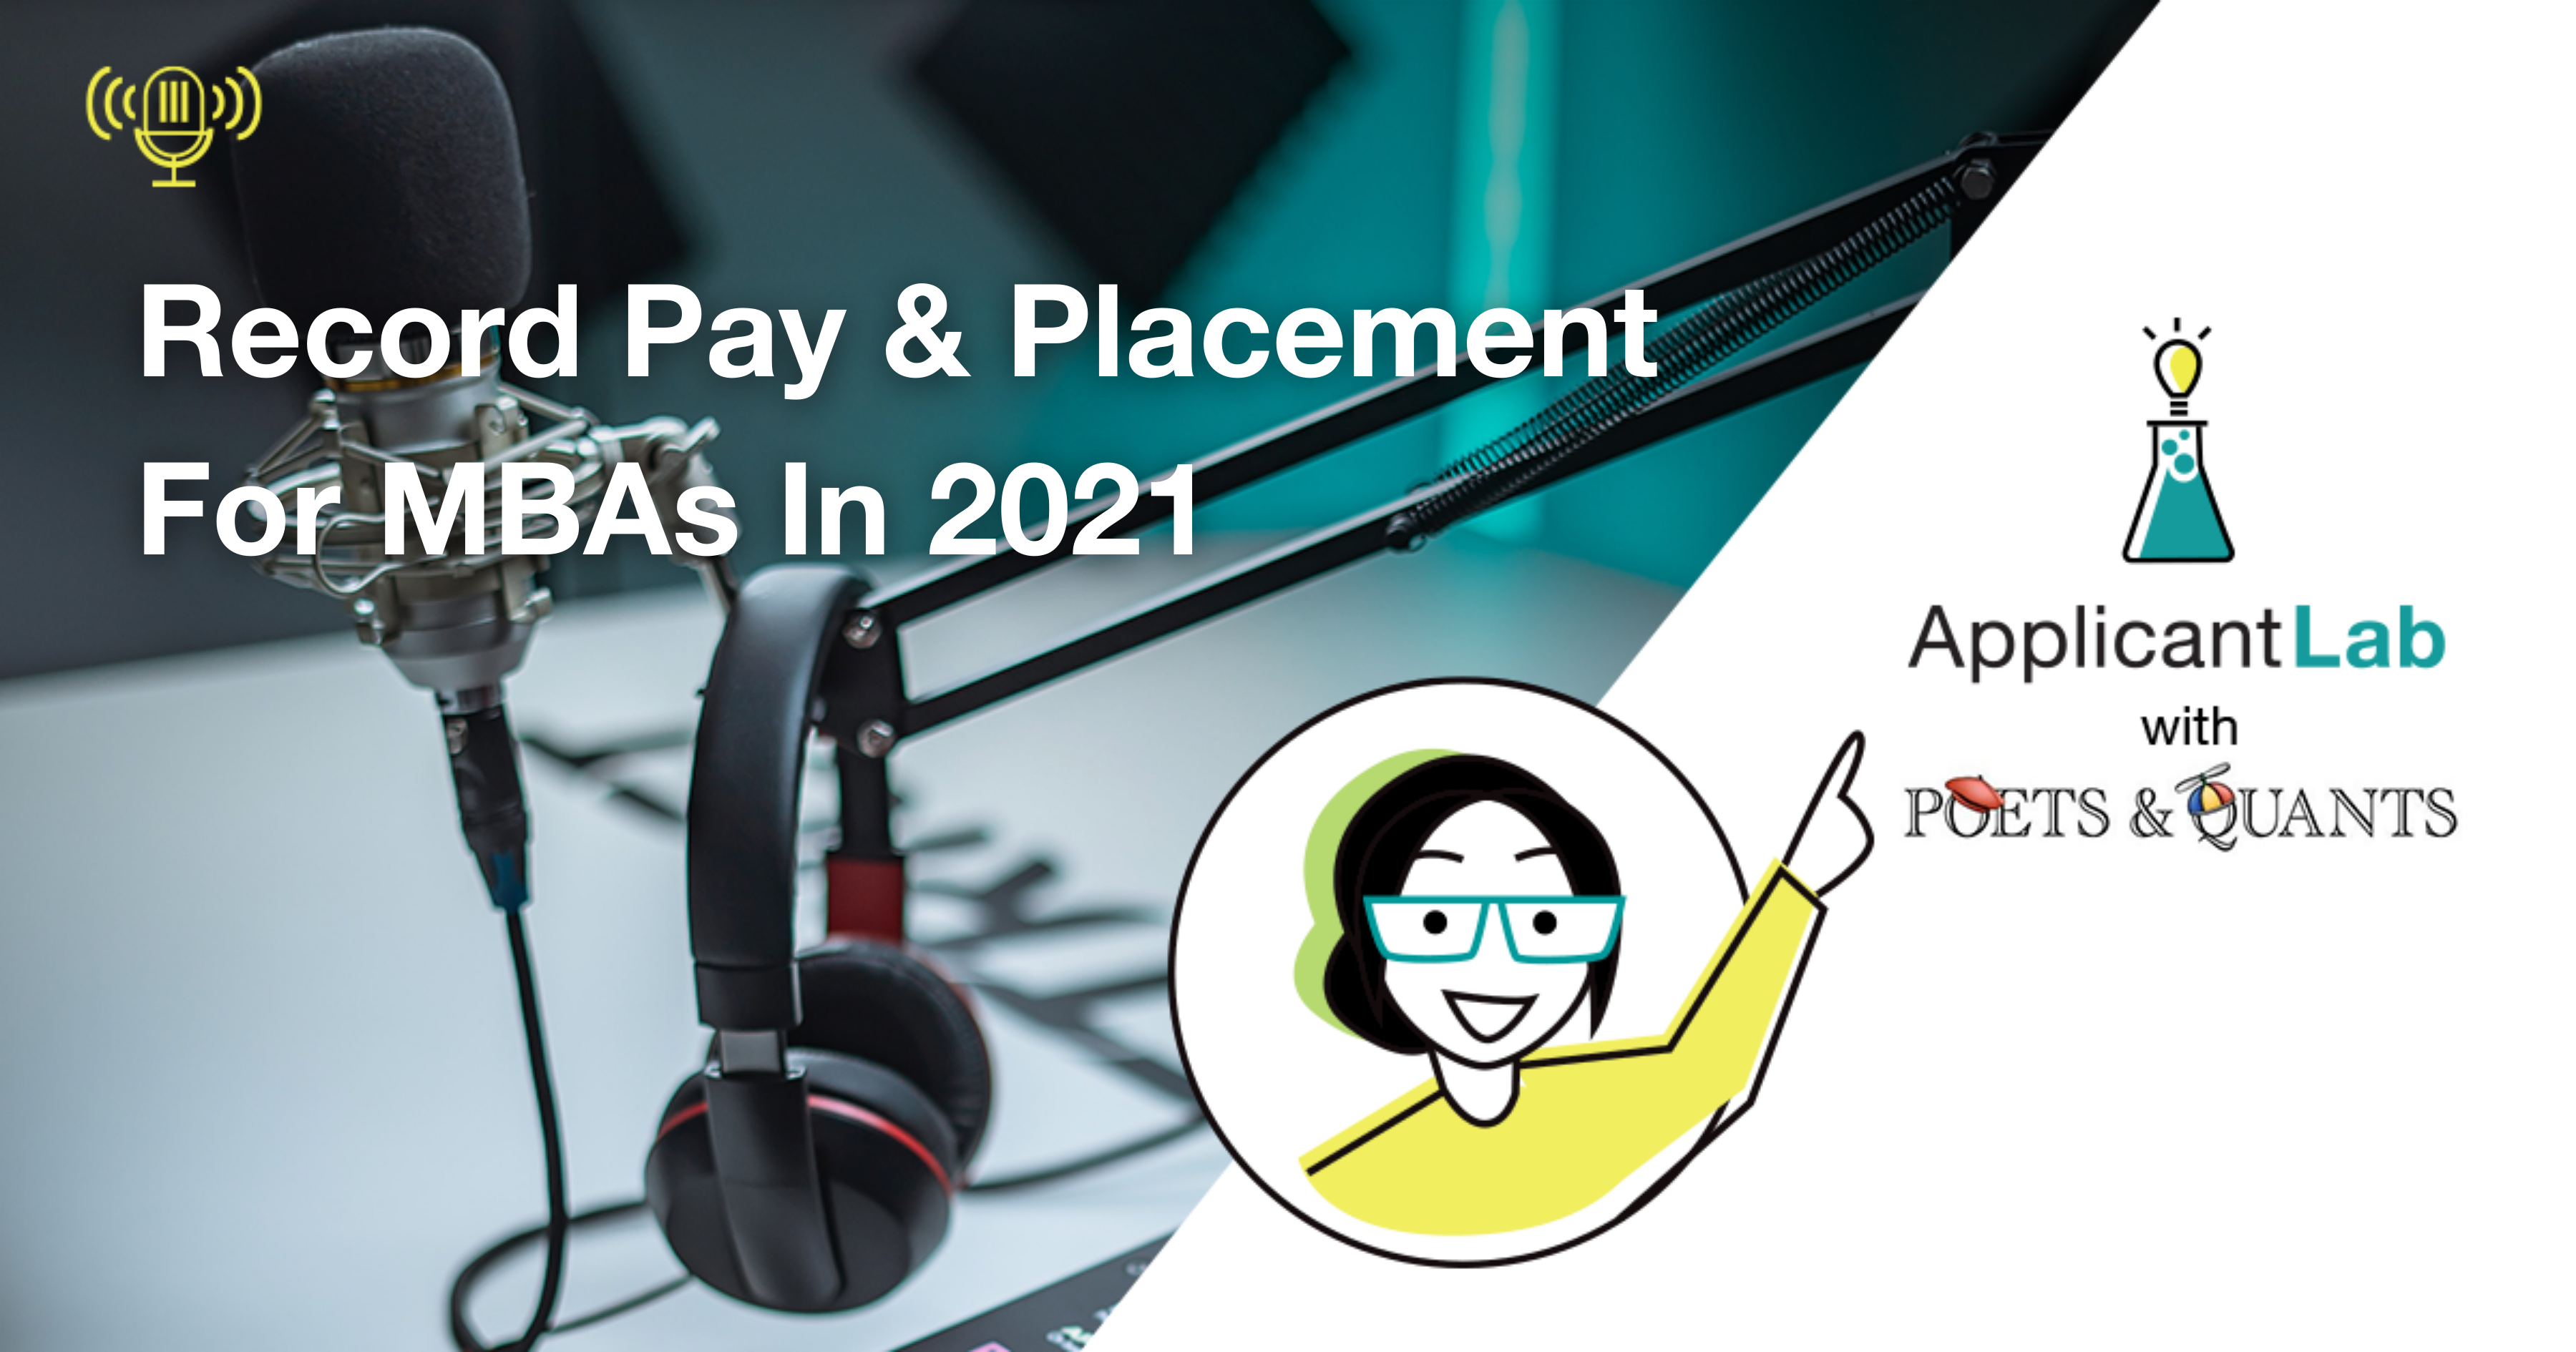 Record Pay & Placement For MBAs In 2021